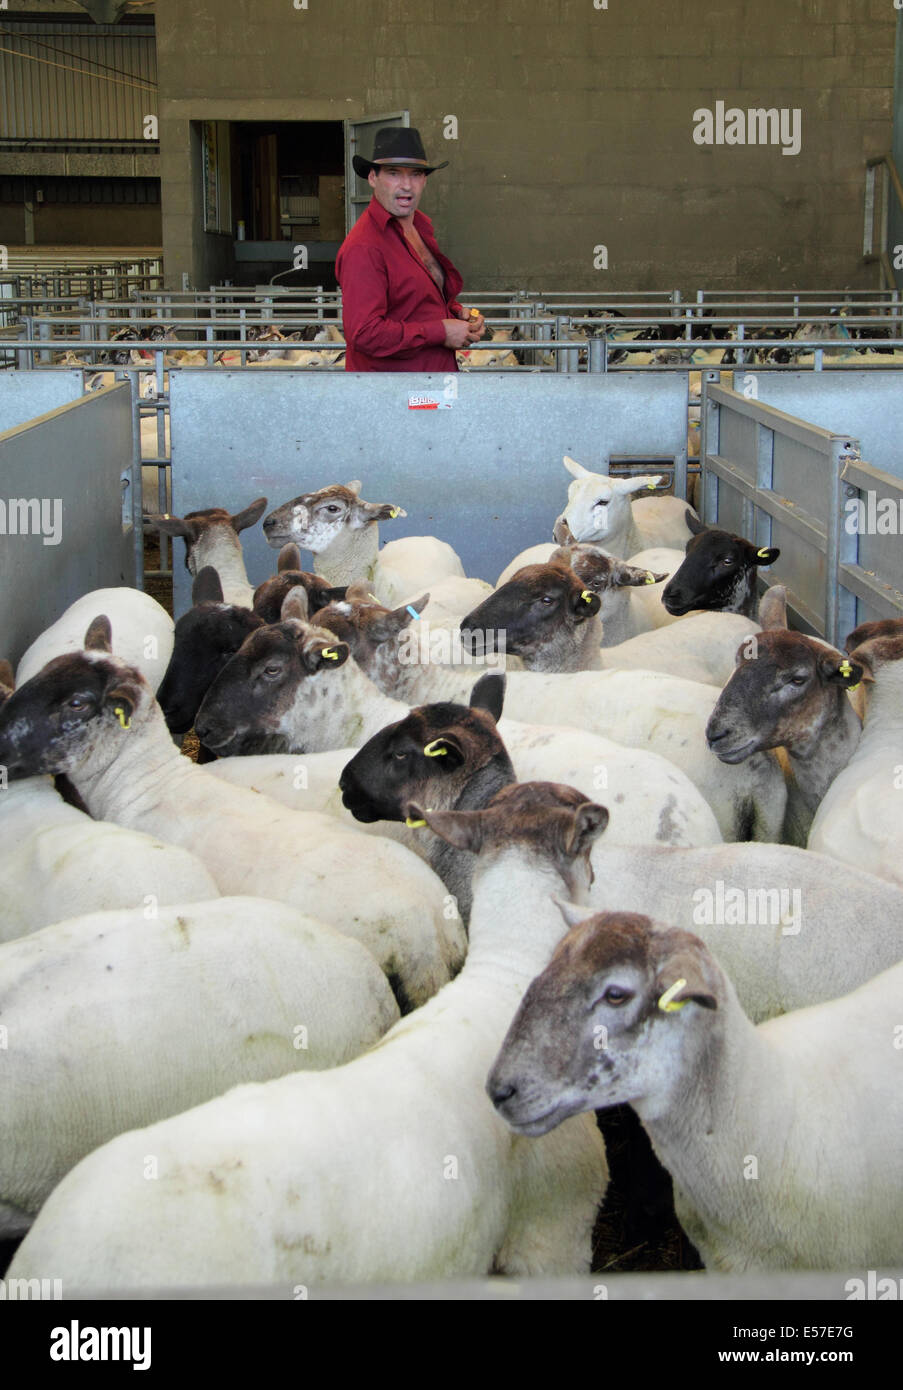 A man surveys black faced sheep penned at Bakewell's livestock market prior to being auctioned, Peak District, Derbyshire, UK Stock Photo